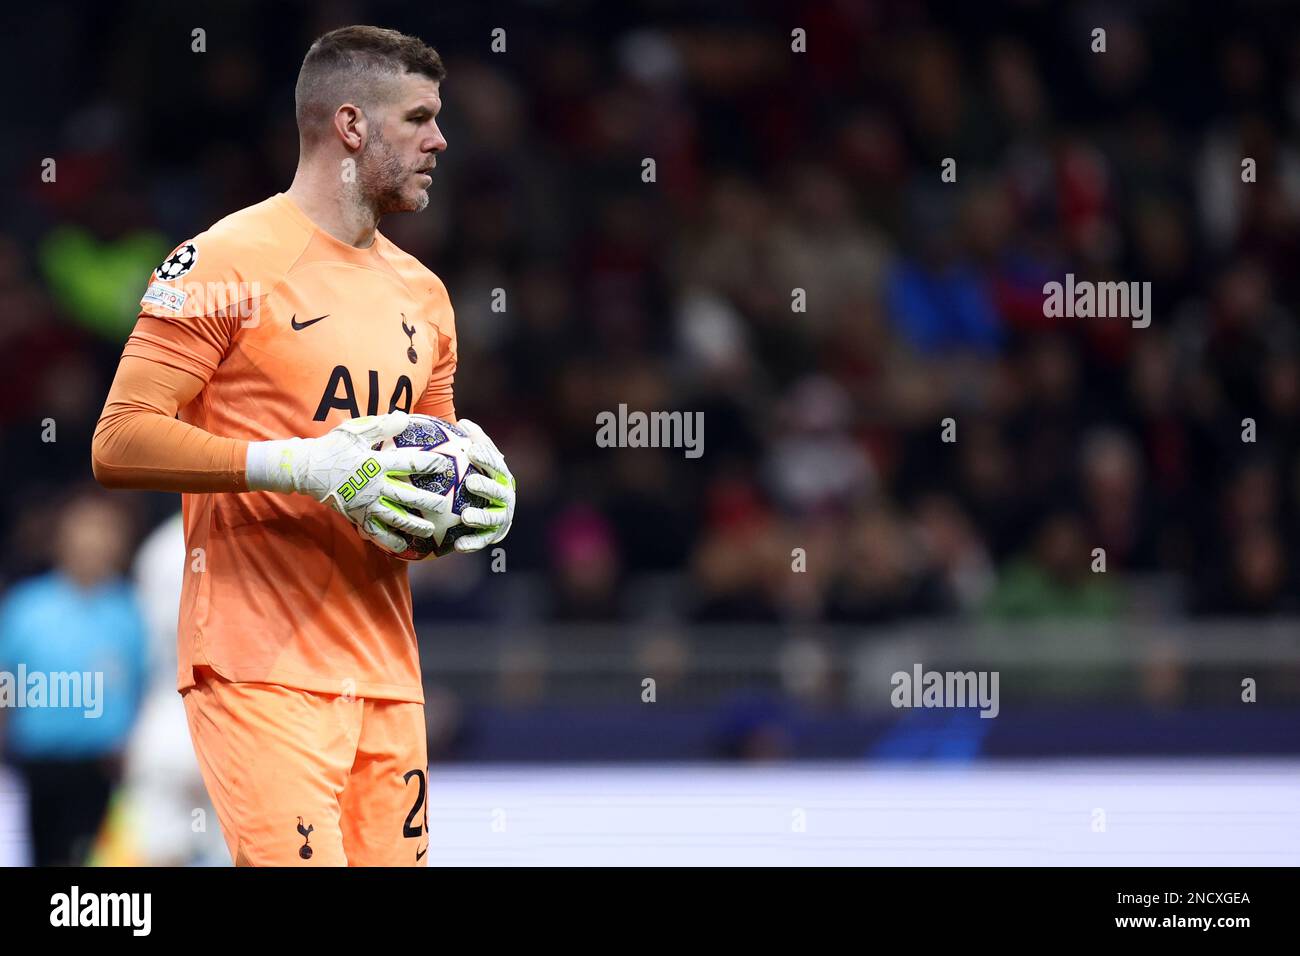 Milan, Italy. February 14, 2023, Fraser Forster of Tottenham Hotspur Fc looks on during the UEFA Champions League round of 16 leg one match between AC Milan and Tottenham Hotspur at Giuseppe Meazza Stadium on February 14, 2023 in Milan, Italy. Stock Photo